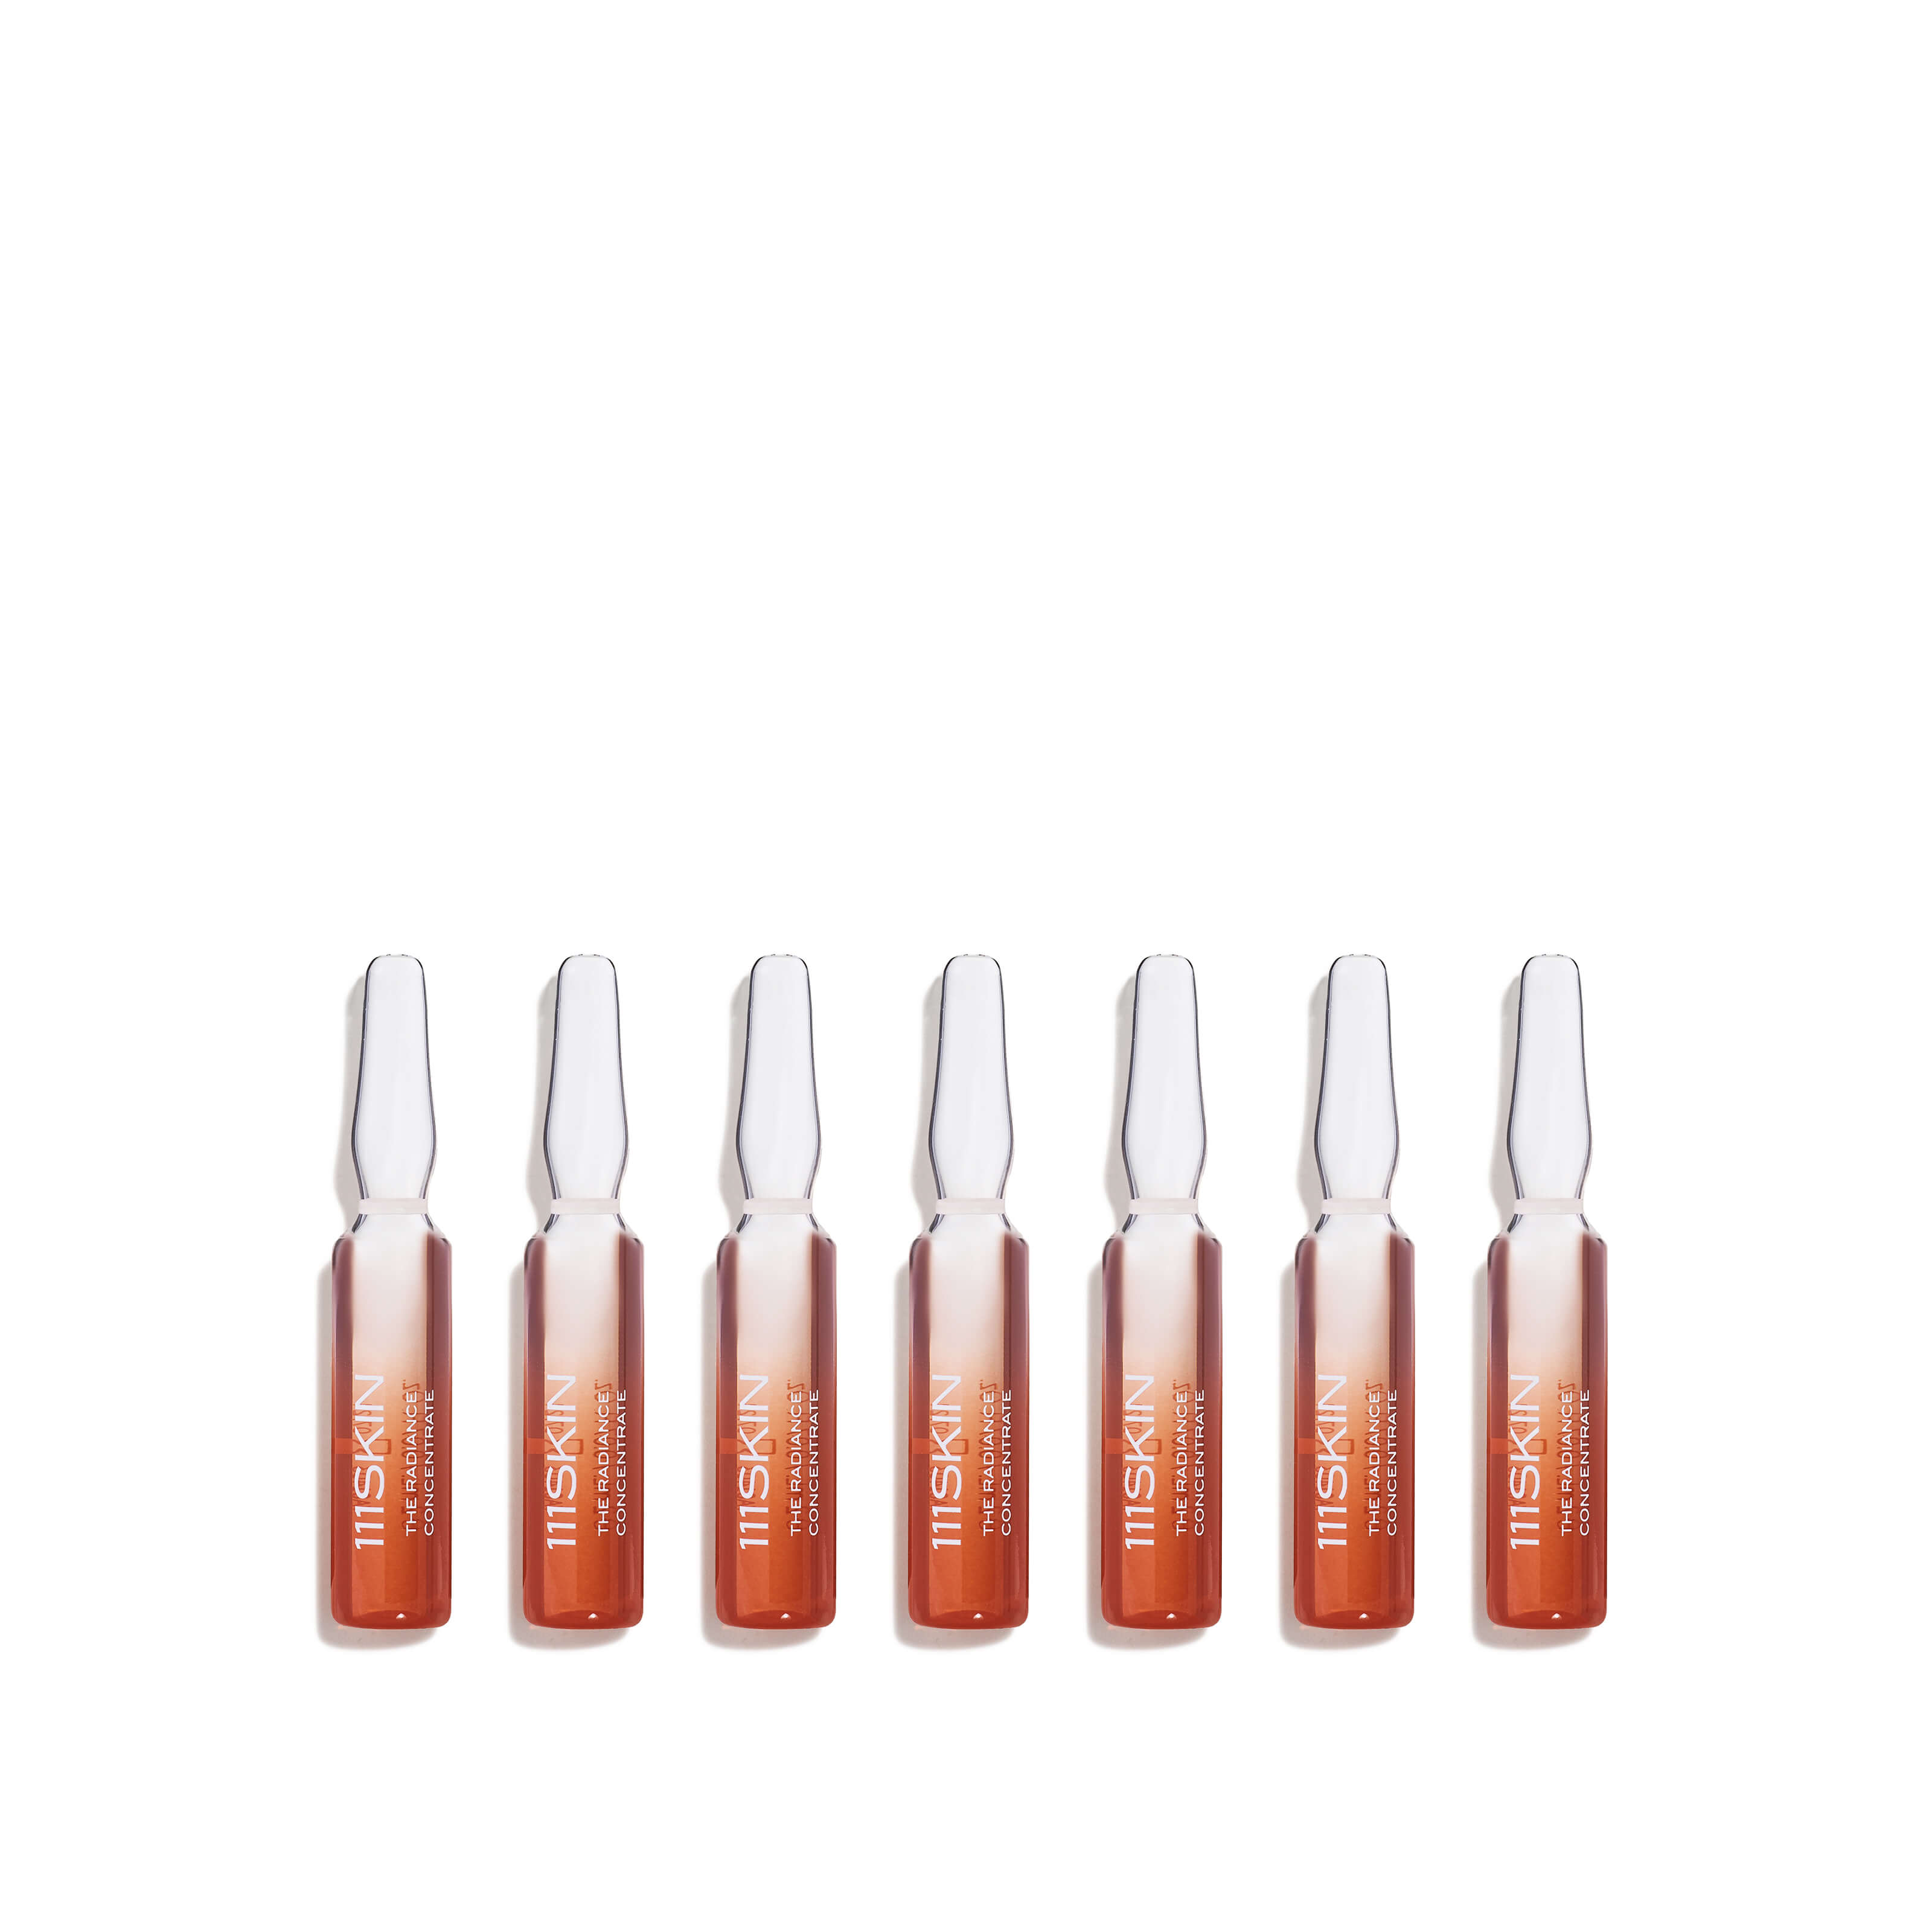 The Radiance Concentrate (7 x 2 ml)